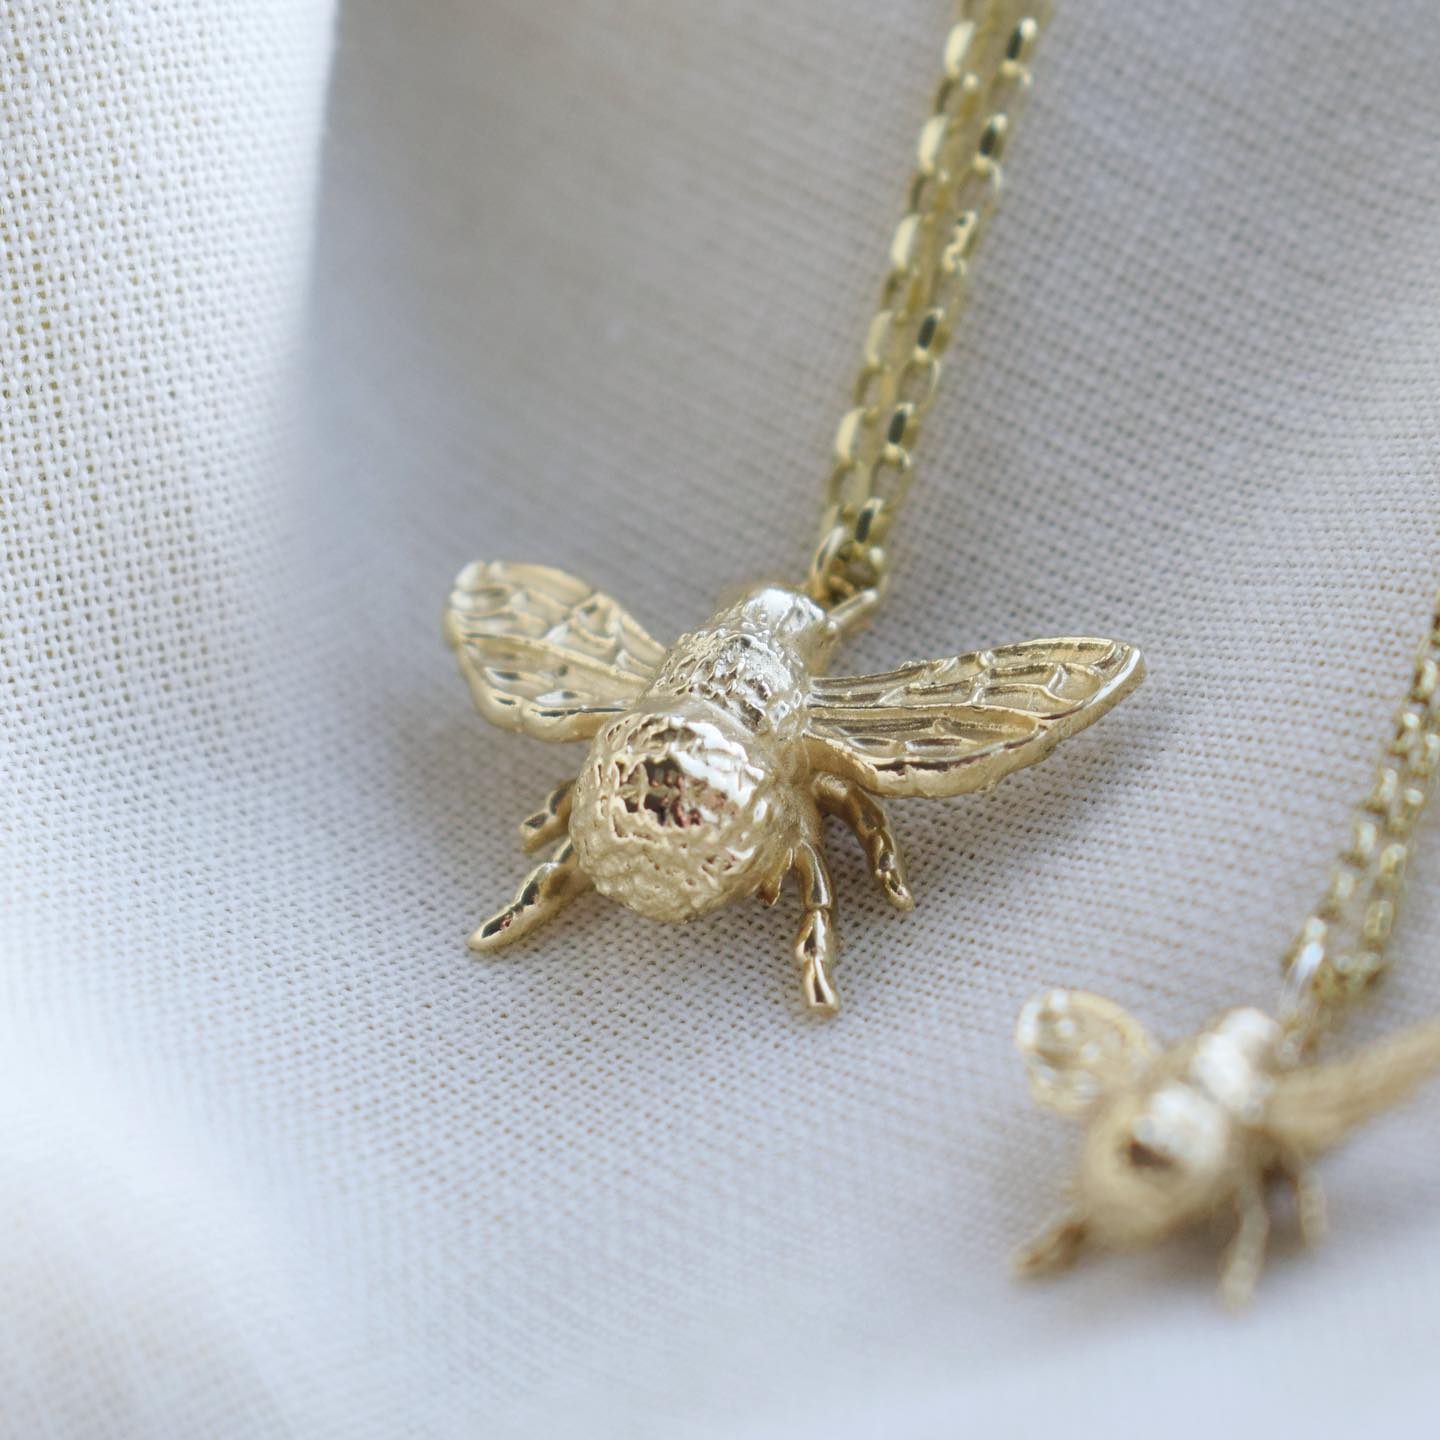 Gold Honey Bee Necklace, Bumblebee Necklace, Tiny Bee Disc Necklace, Petite  Bee Disc Necklace, Silver Bumble Bee Necklace, Queen Bee Jewelry - Etsy | Bumble  bee necklace, Bee jewelry, Necklace